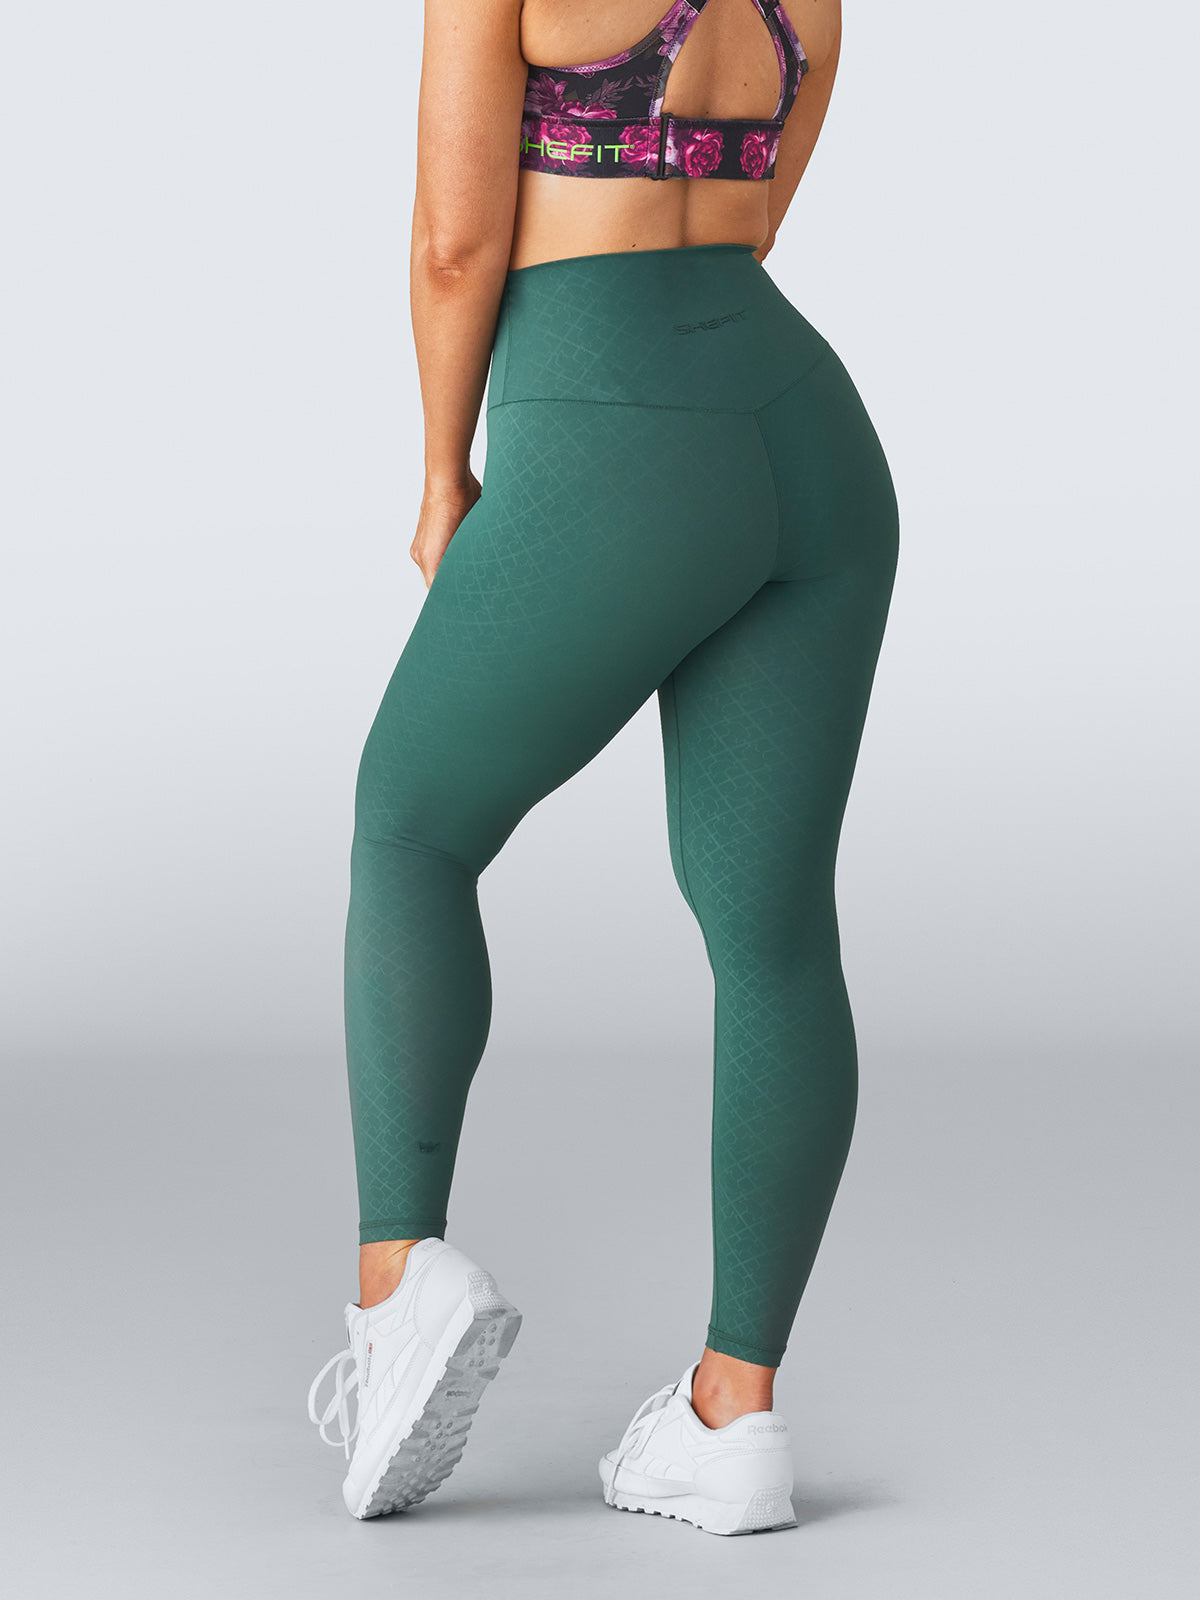 SHEFIT - Check out what SHEFIT VIP JanElle was able to get early 👀 Leggings  you can sweat in, squat in and slay in, all day long. 🙌 - Raise your hand